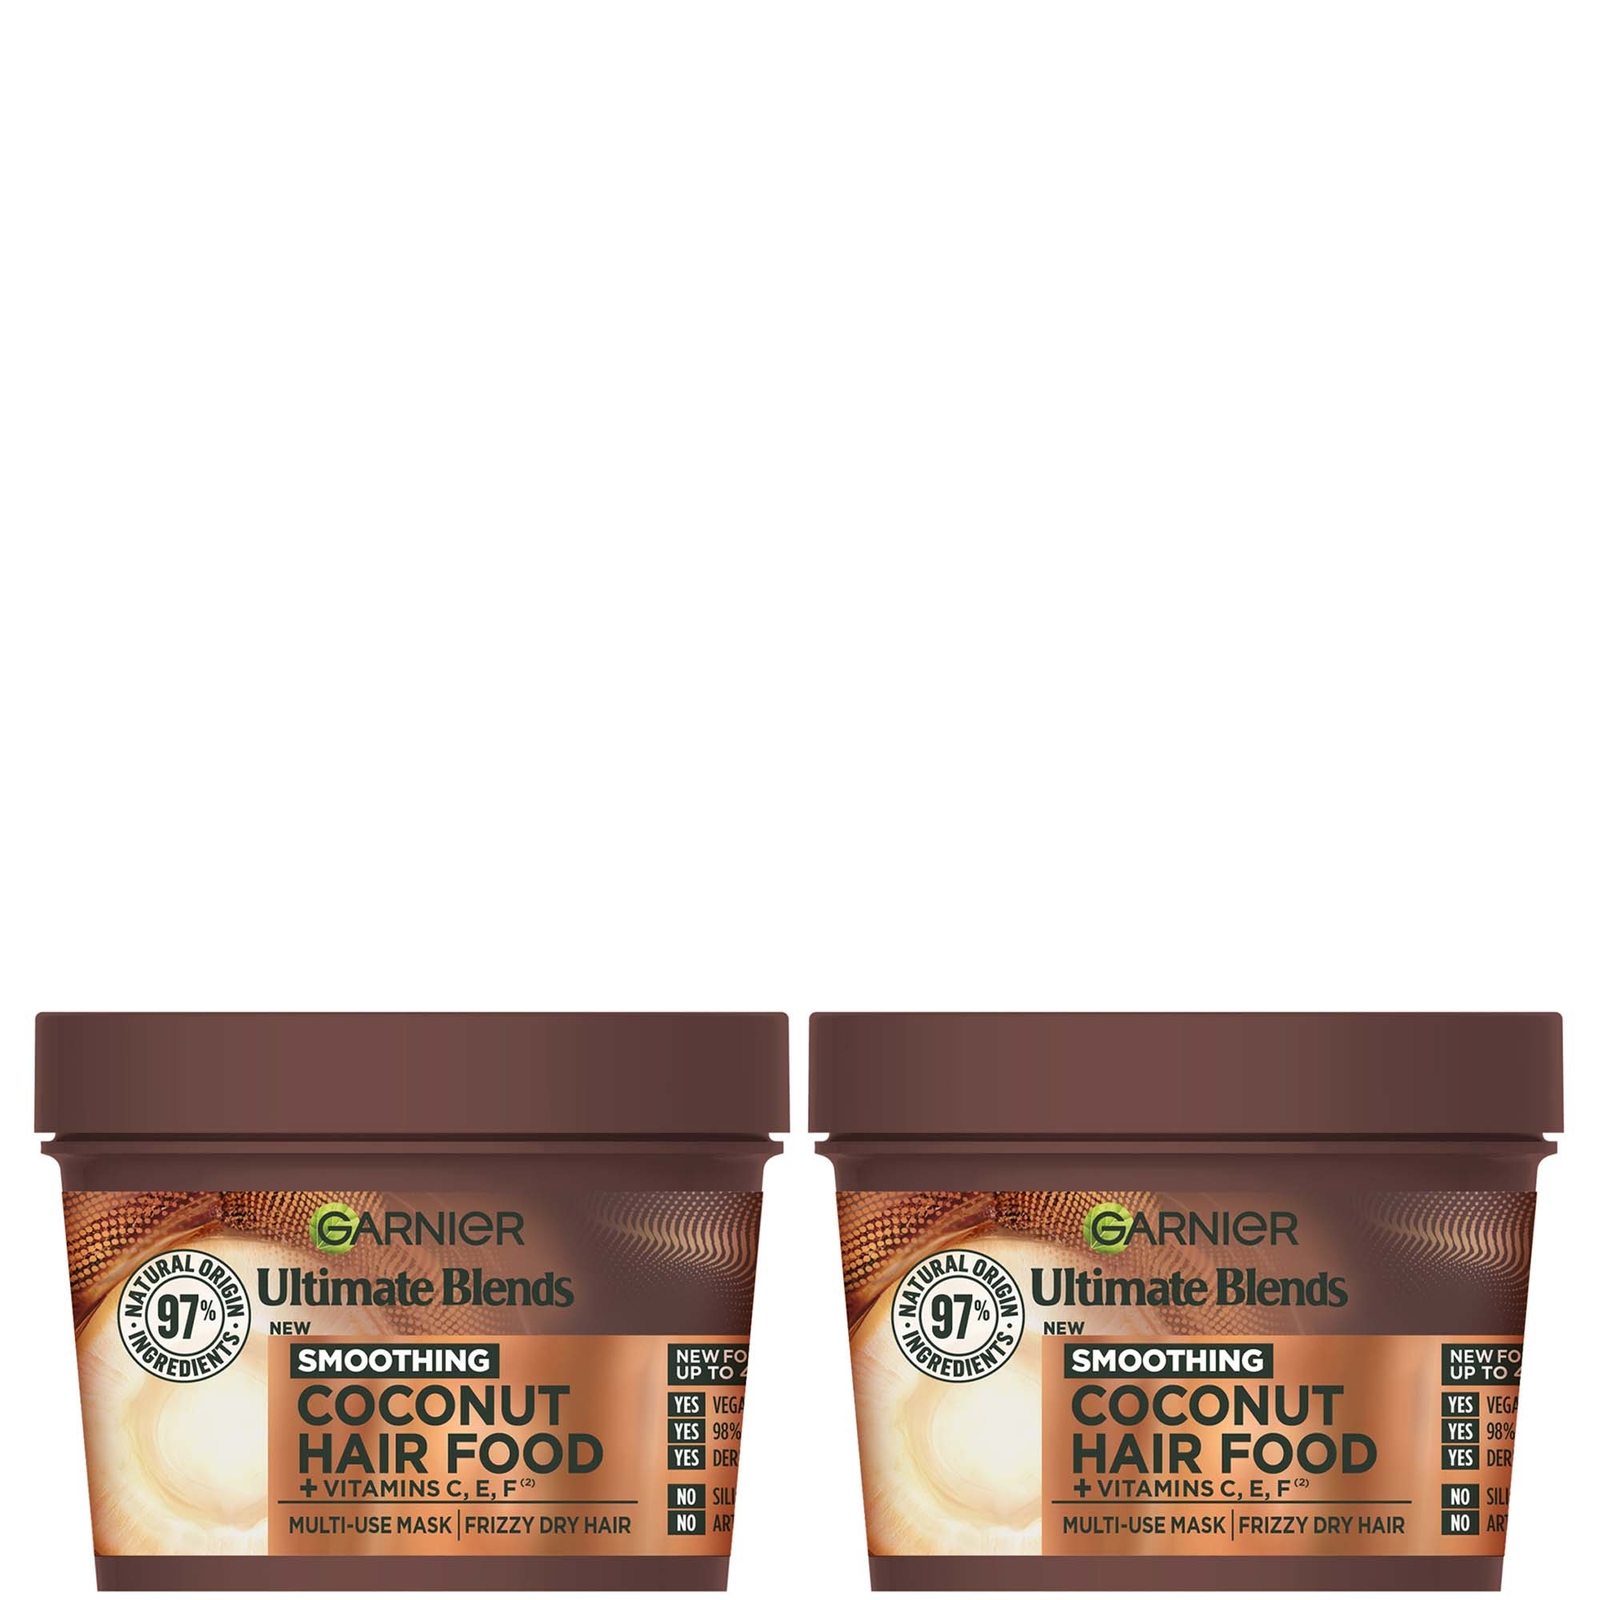 Image of Garnier Ultimate Blends Coconut 3-in-1 Frizzy Hair Mask Duo